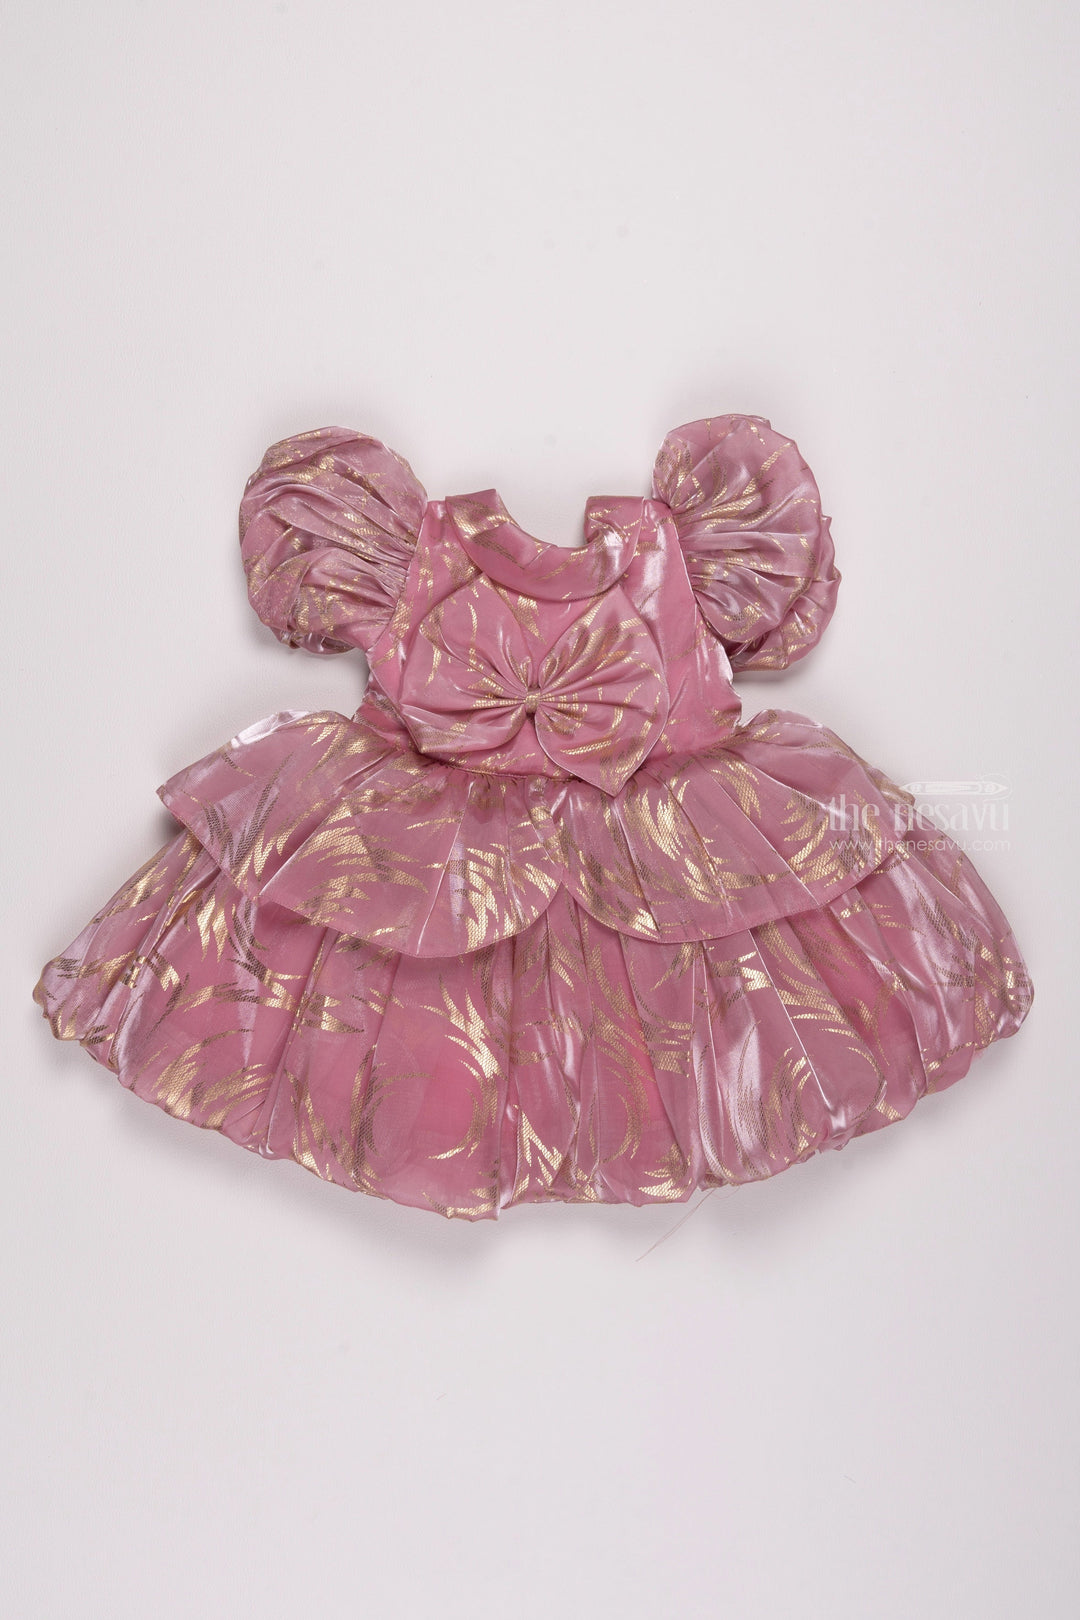 The Nesavu Girls Fancy Party Frock Rose Radiance: Girls Organza Party Frock with Lustrous Foil Print & Bow Detail Nesavu 12 (3M) / Pink / Organza PF140B-12 Mermaid Birthday Outfits: Trendy & Stylish Baby Girl Frocks | The Nesavu